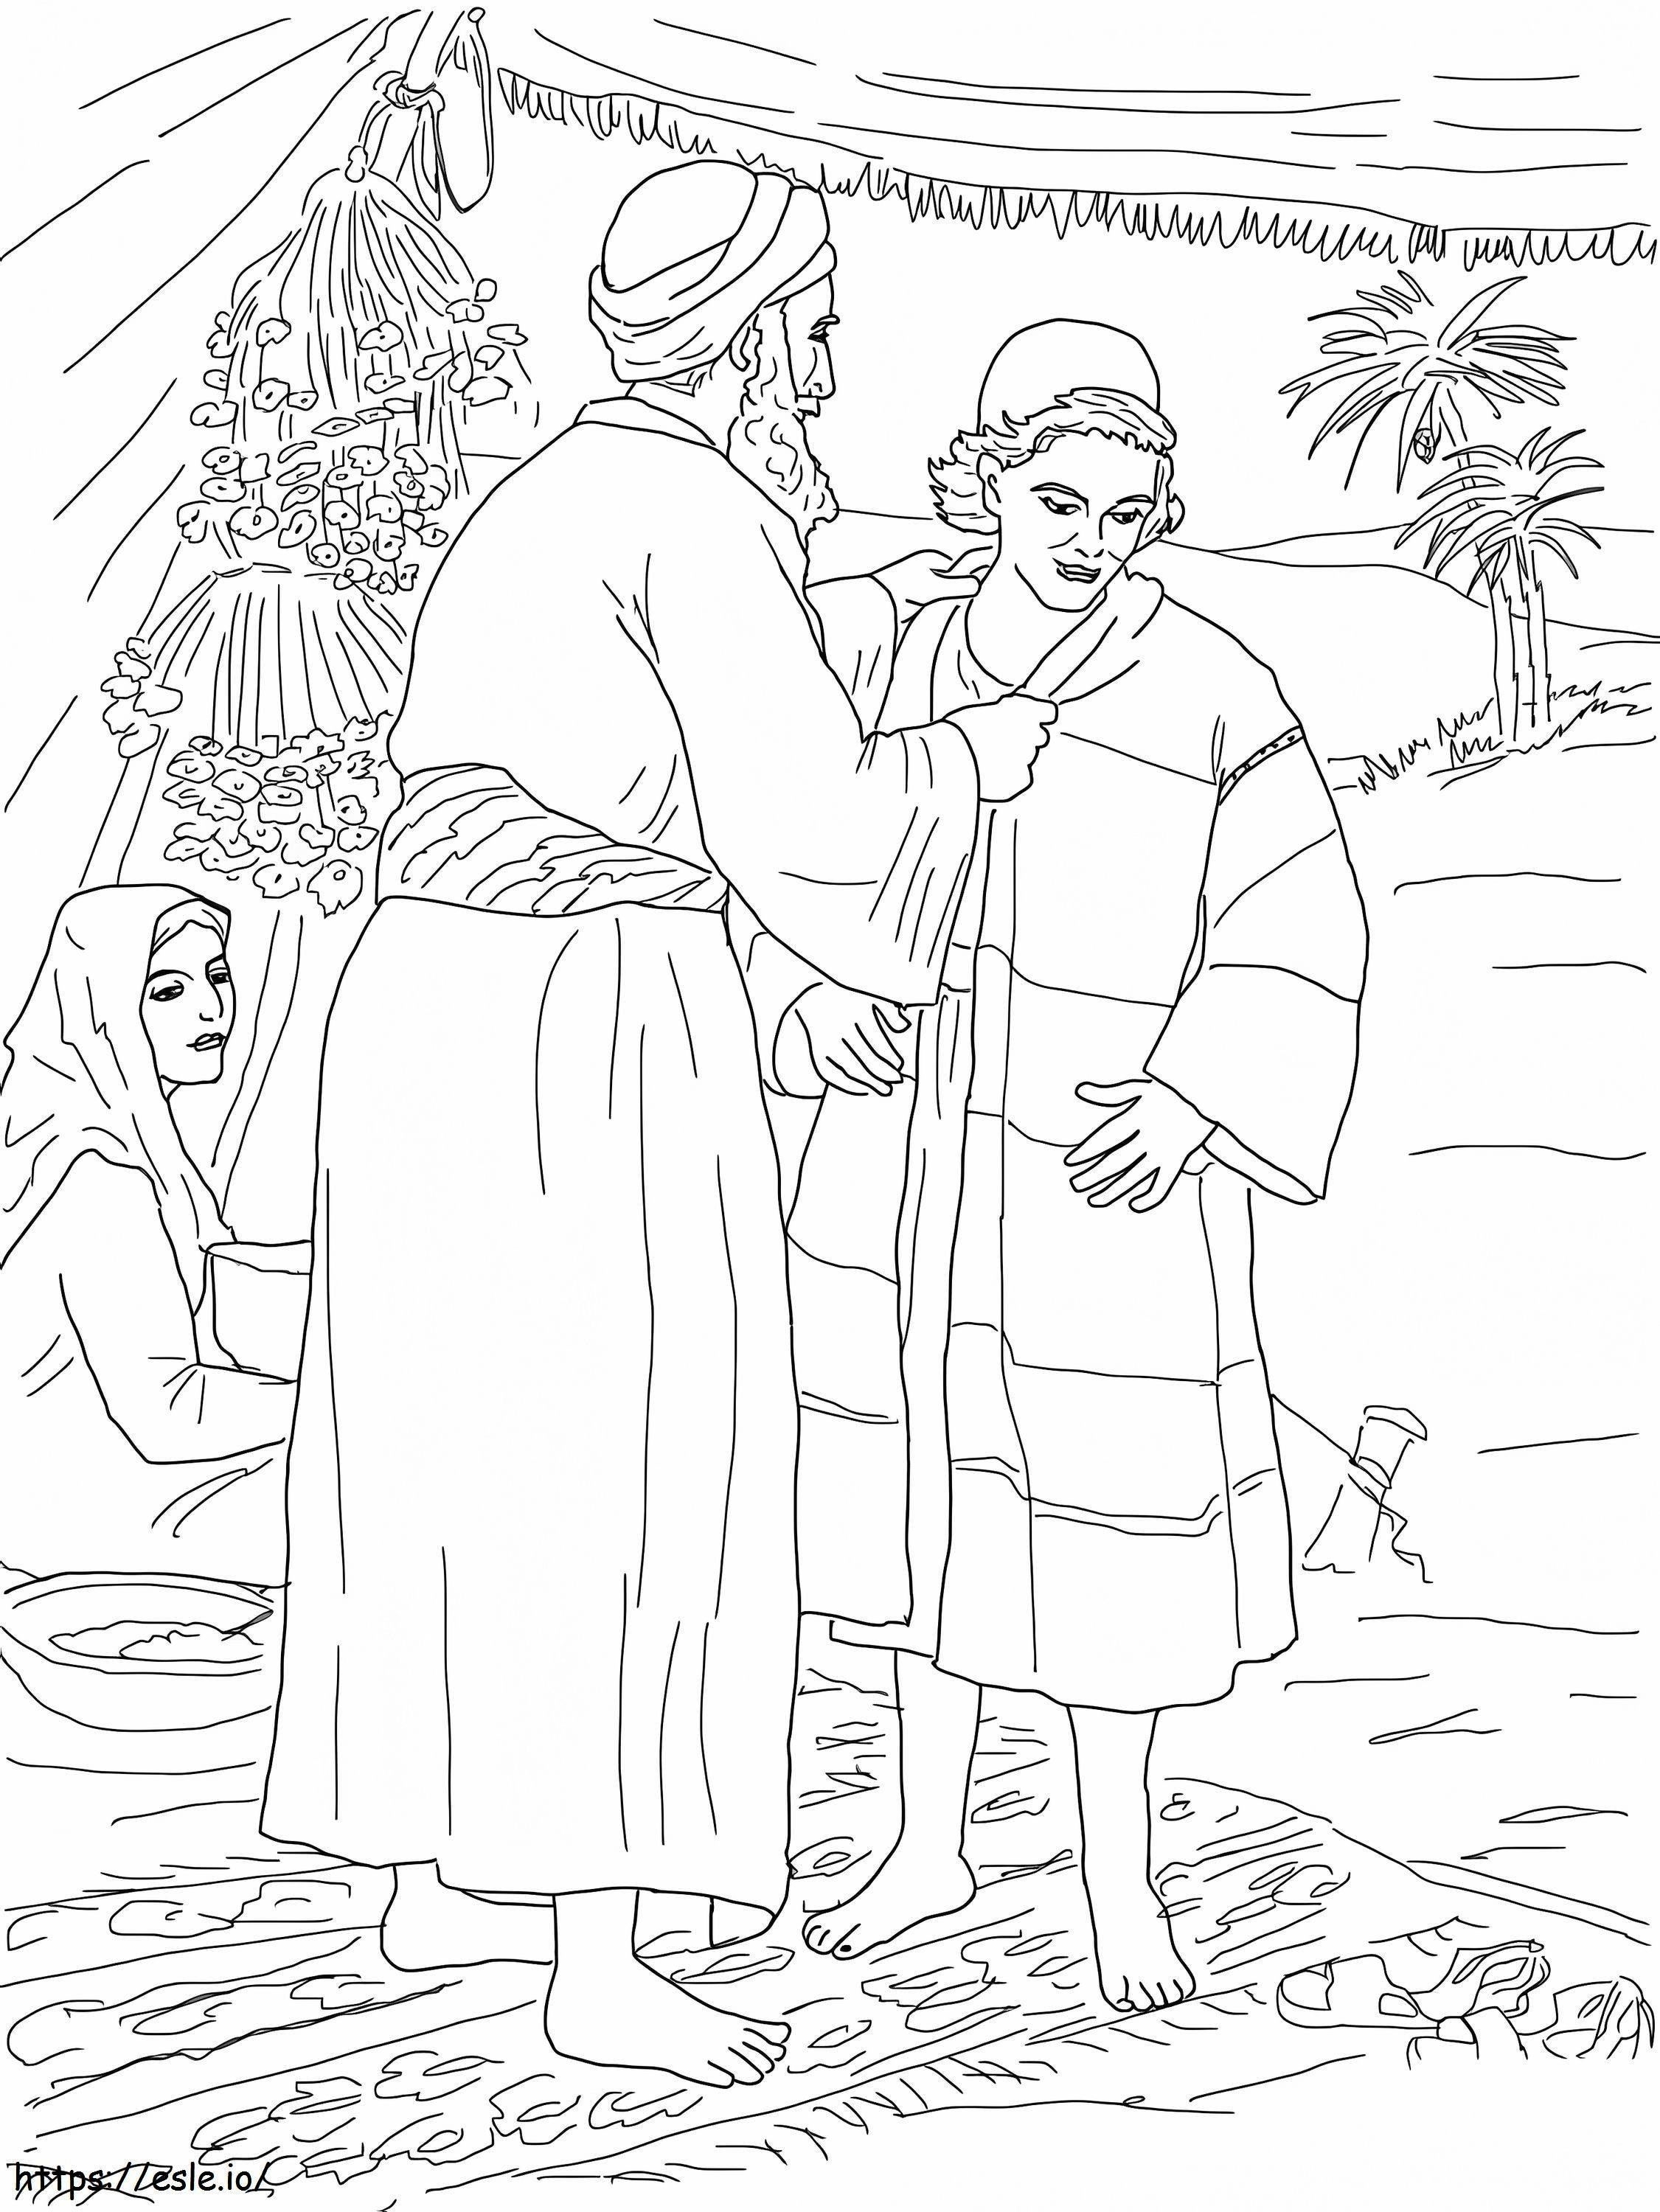 Joseph Coat Of Many Colors 1 coloring page